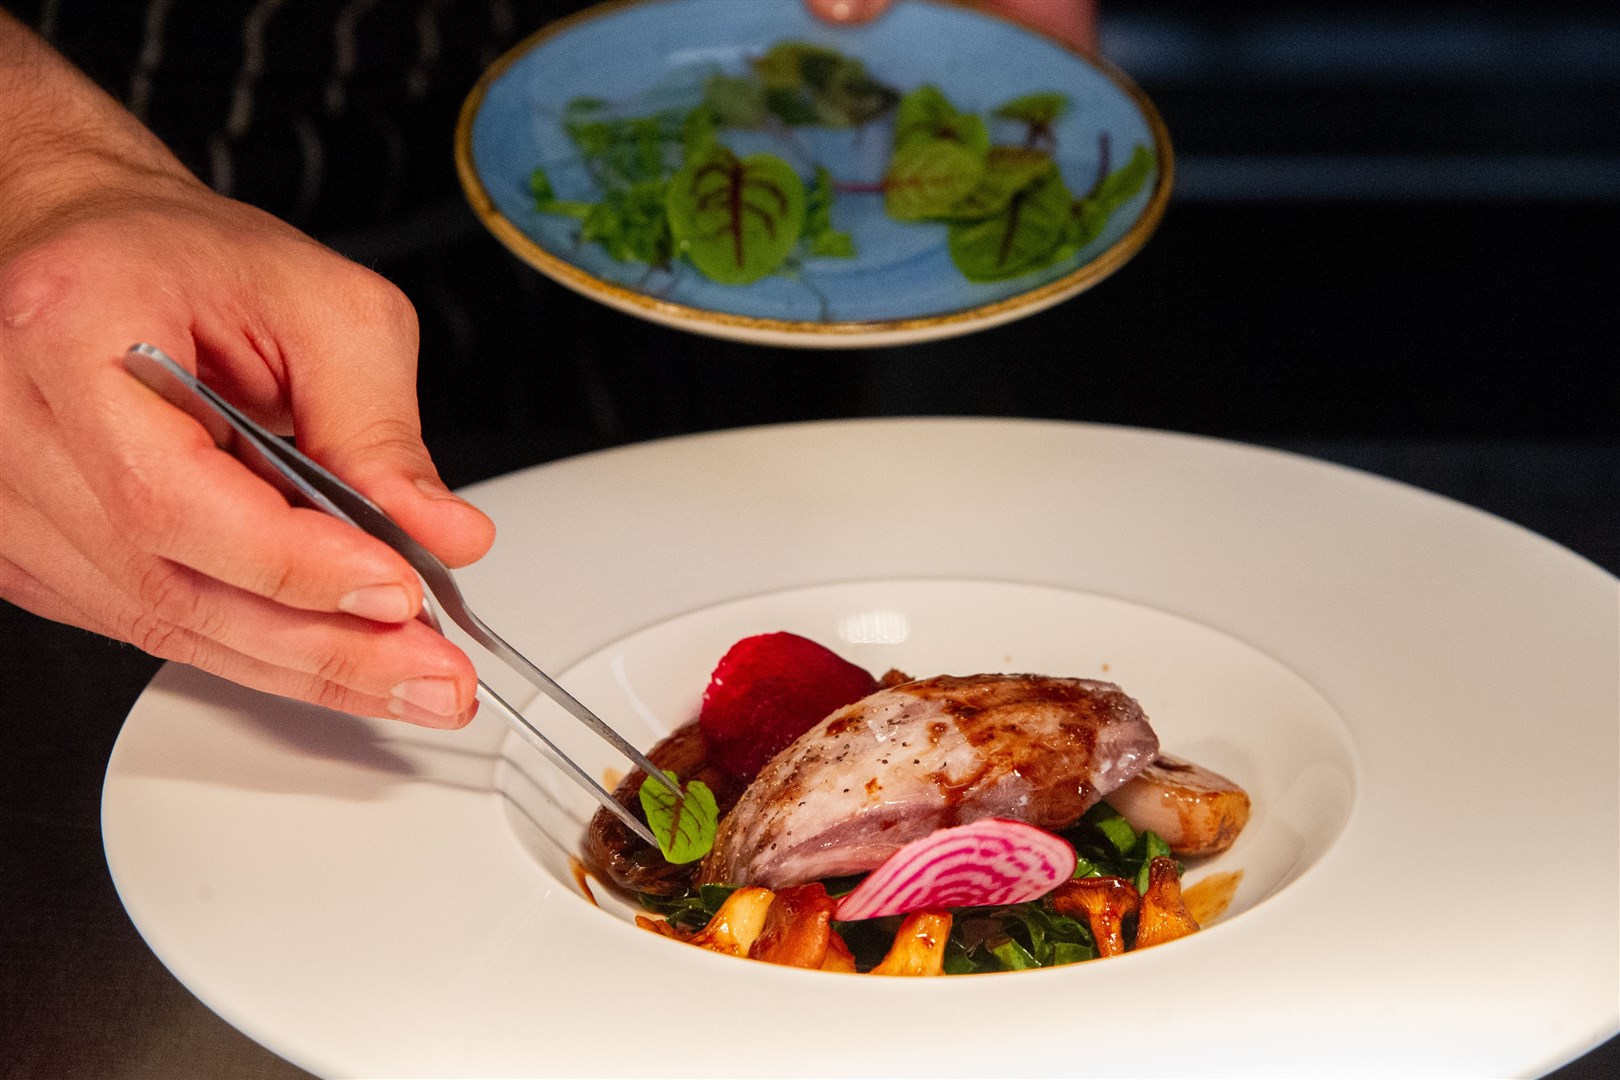 Applying the final touches to a locally produced dish. Picture: Daniel Forsyth.